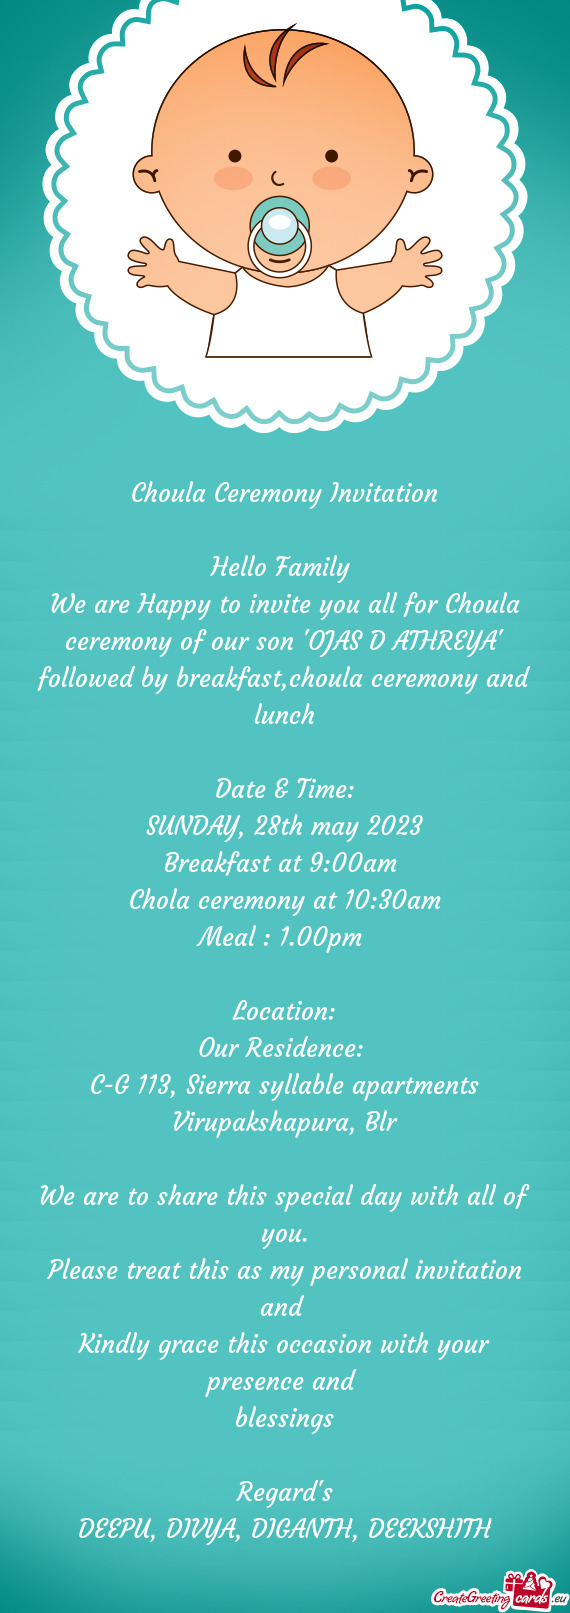 We are Happy to invite you all for Choula ceremony of our son "OJAS D ATHREYA" followed by breakfast